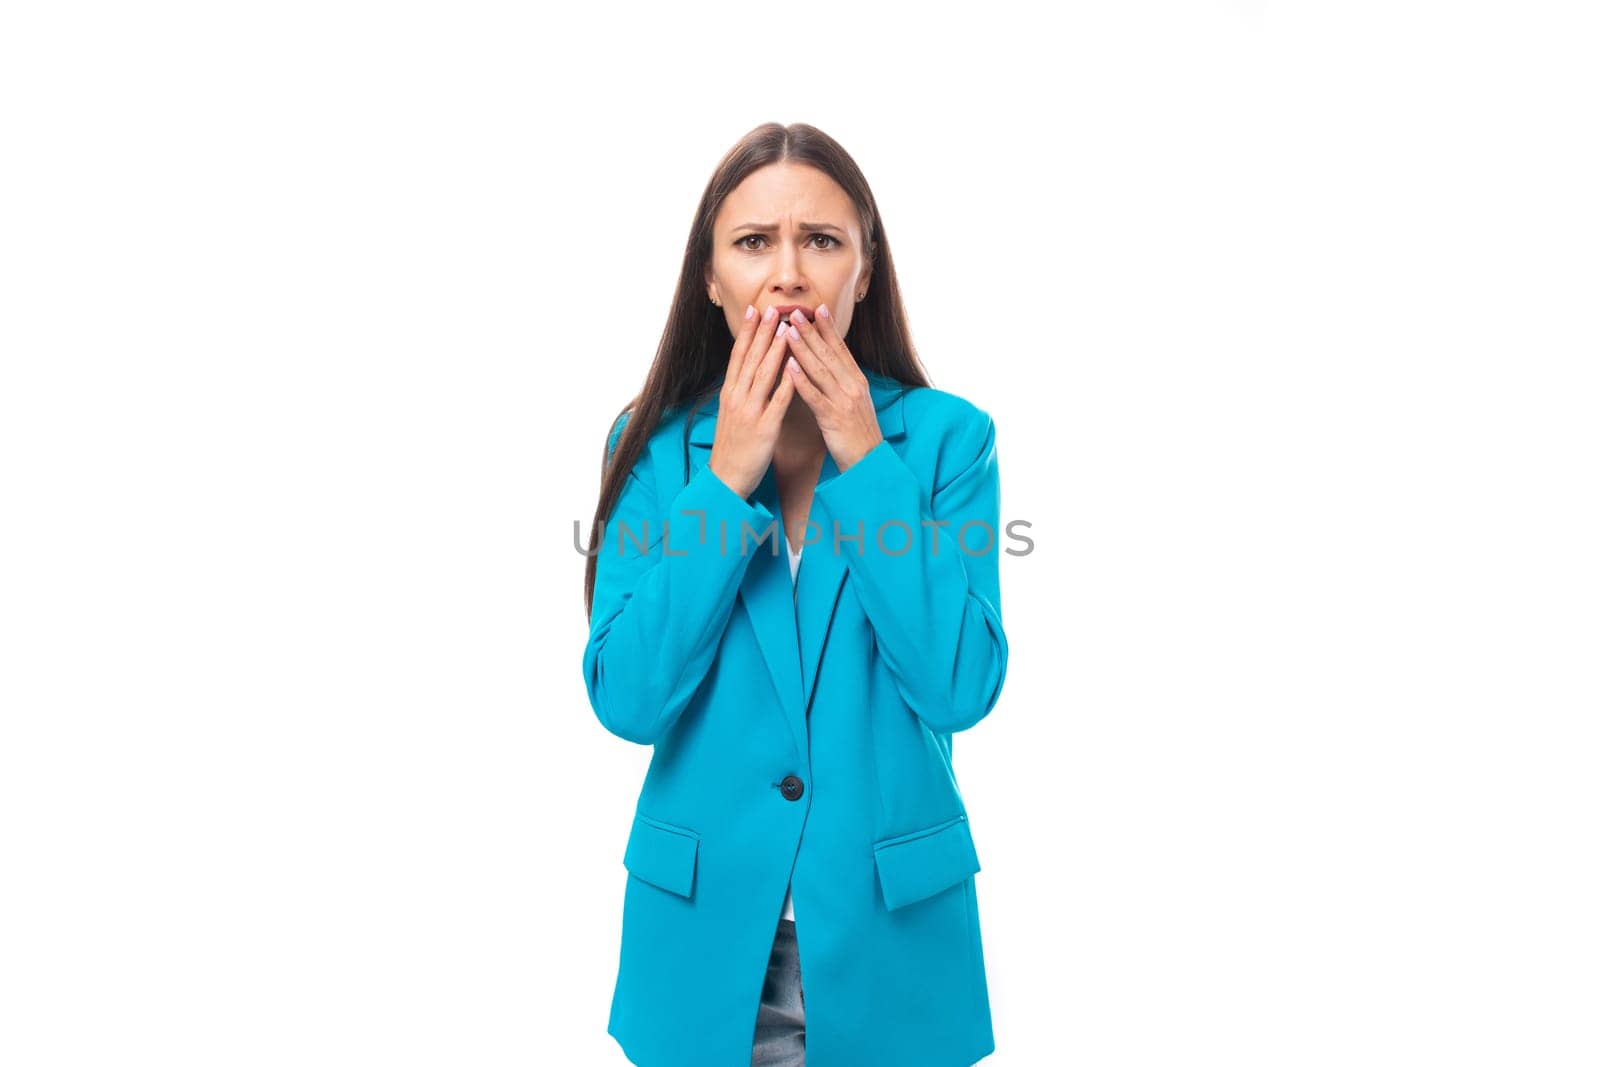 young attractive office worker woman with black straight hair in a blue business jacket is surprised on a white background with copy space by TRMK